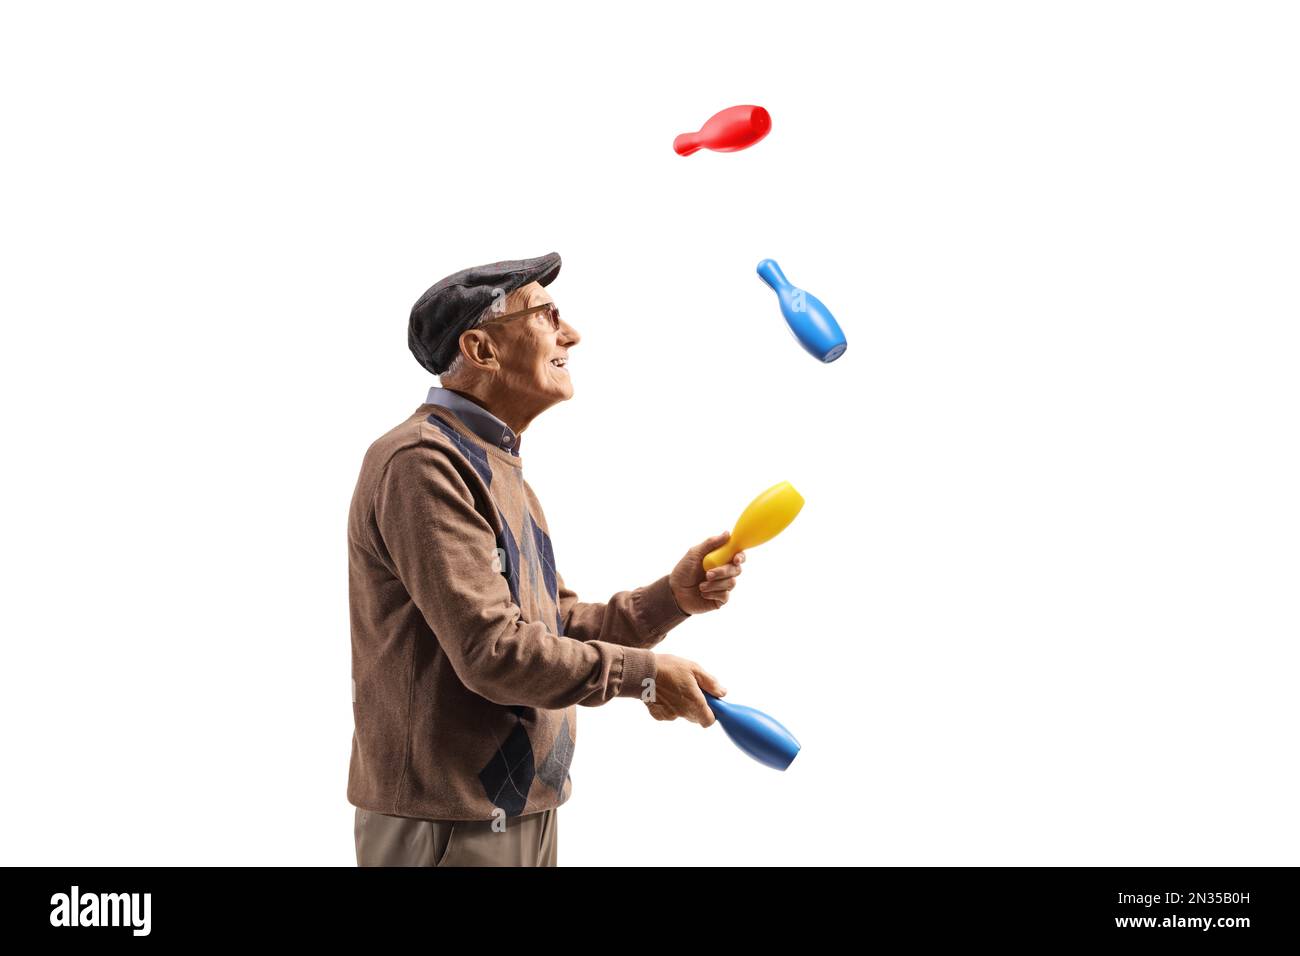 Profile shot of an elderly man juggling with clubs isolated on white background Stock Photo